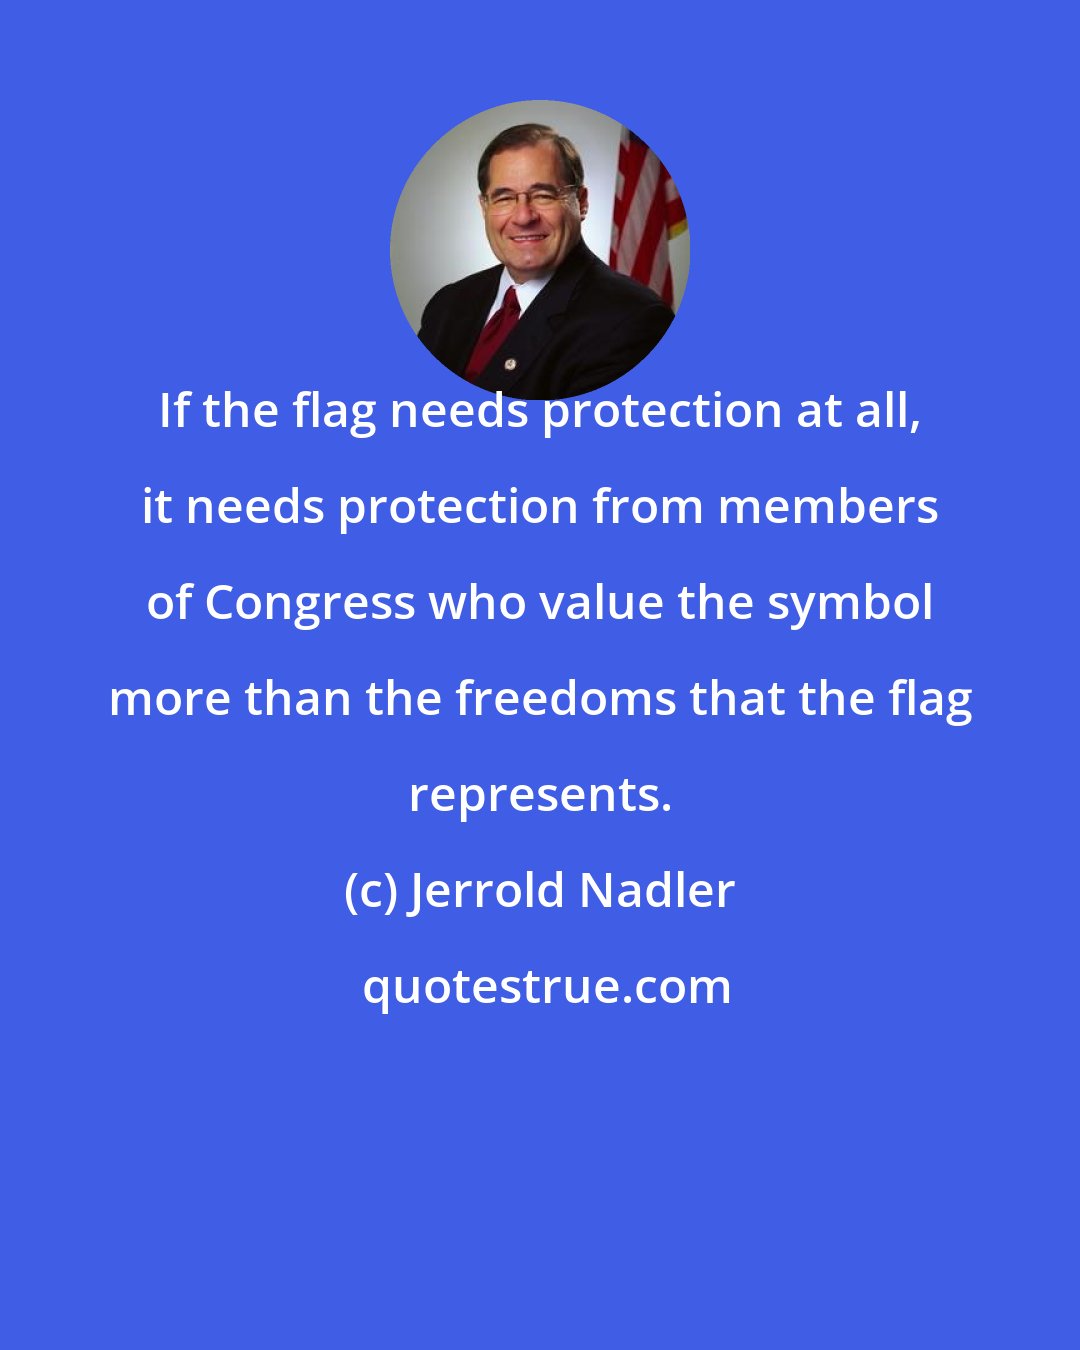 Jerrold Nadler: If the flag needs protection at all, it needs protection from members of Congress who value the symbol more than the freedoms that the flag represents.